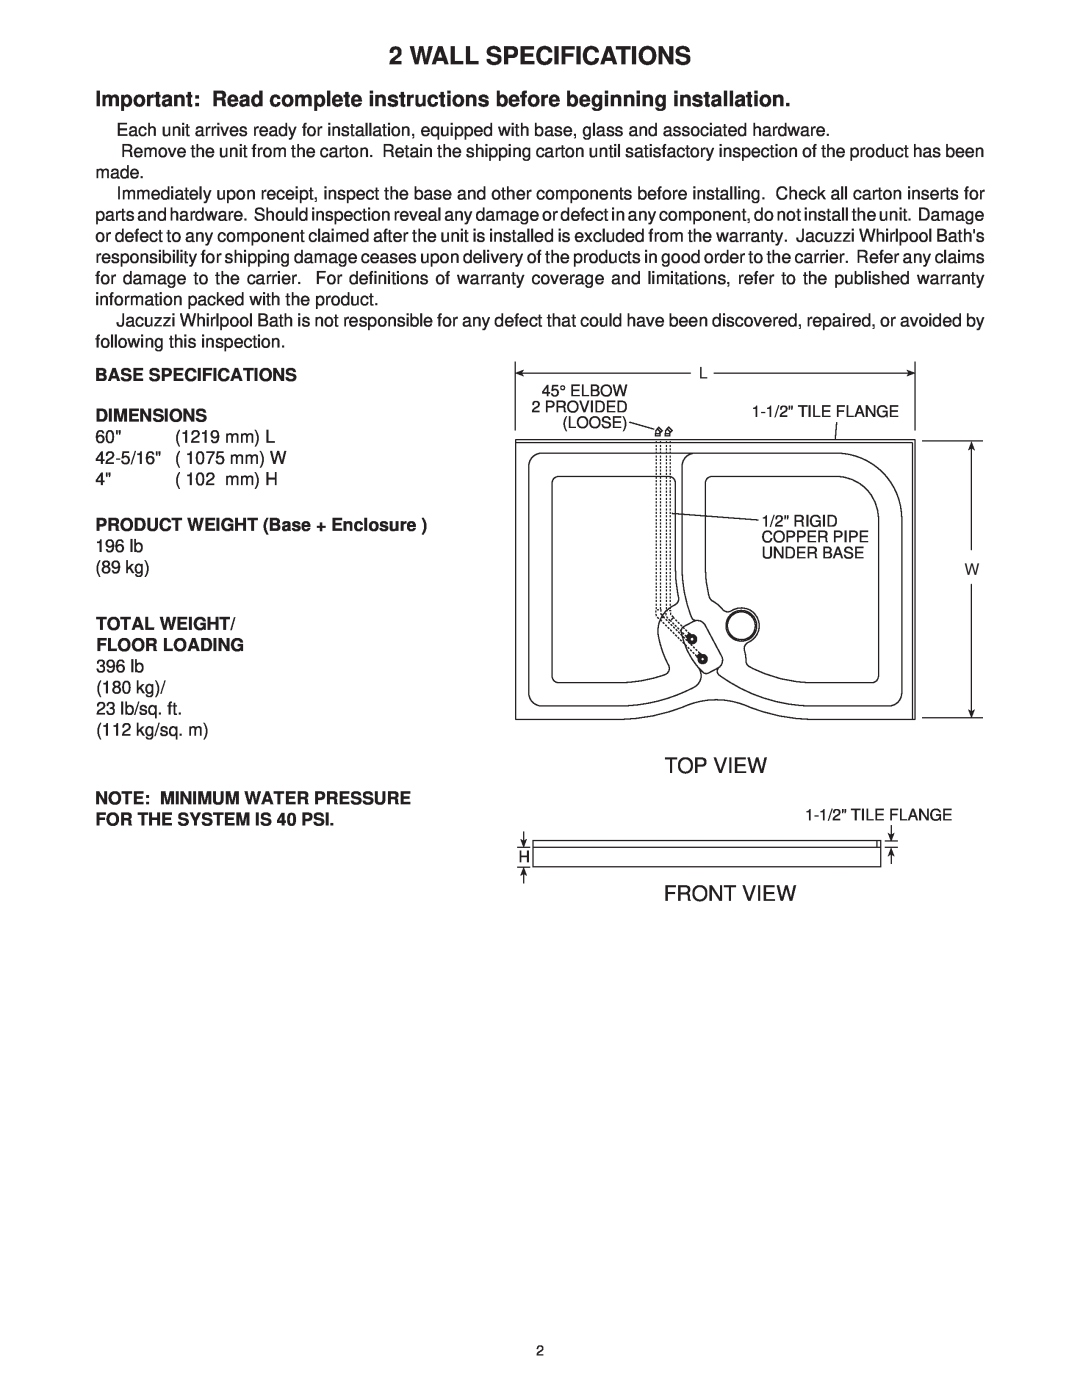 Jacuzzi SUMMER RAINTM 2 WALL & 3 WALL WALK-IN SHOWER SYSTEMS manual Wall Specifications, Top View, Front View 